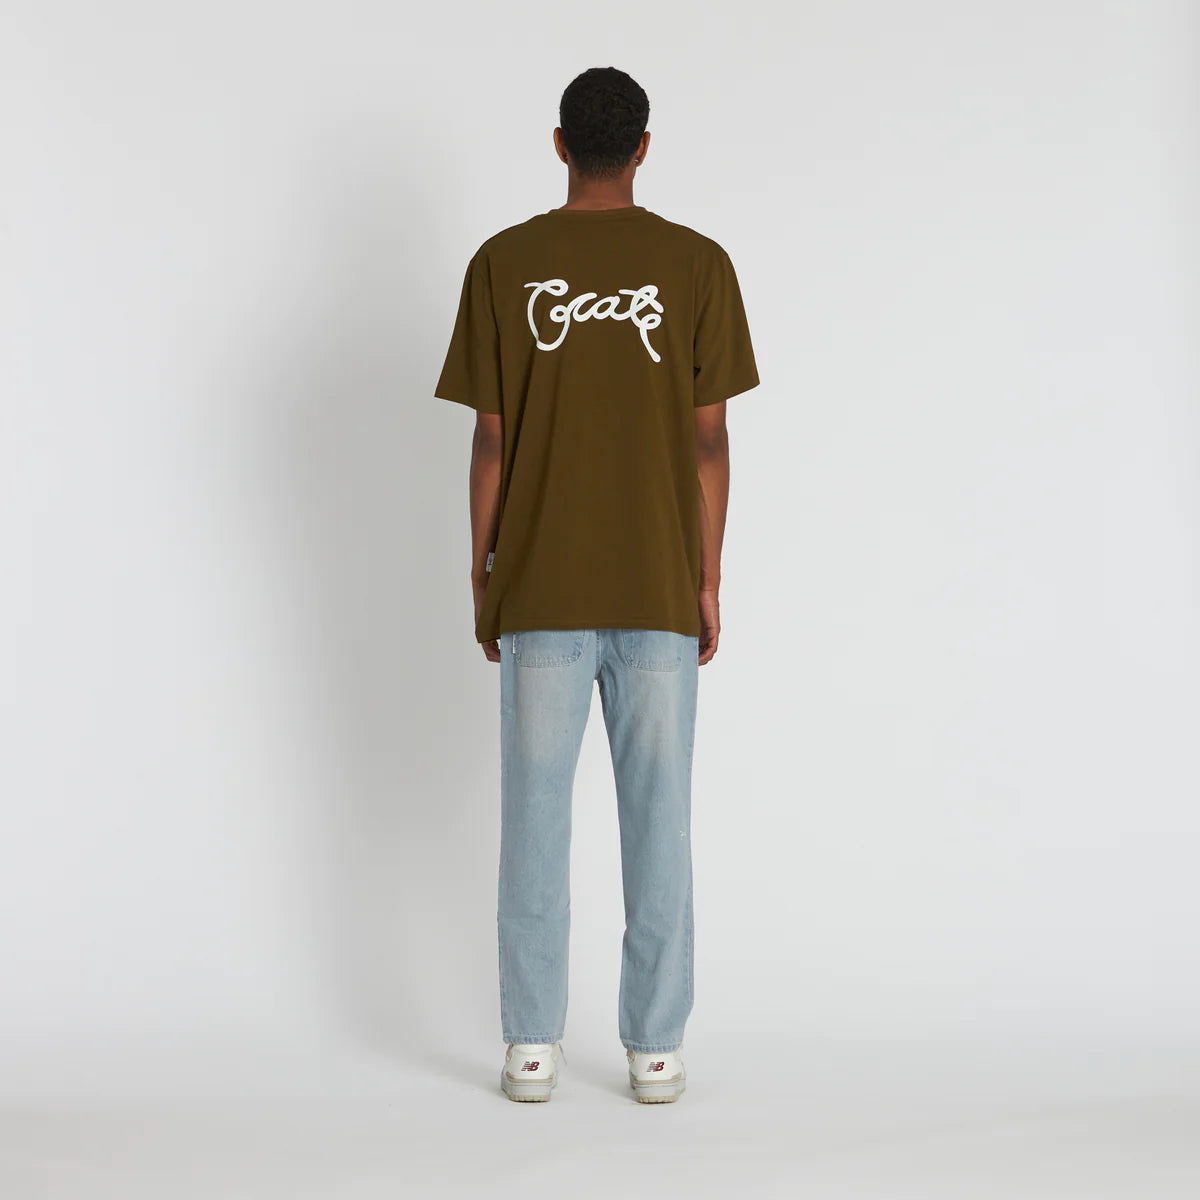 Crate SCRIPTED T-SHIRT - OLIVE